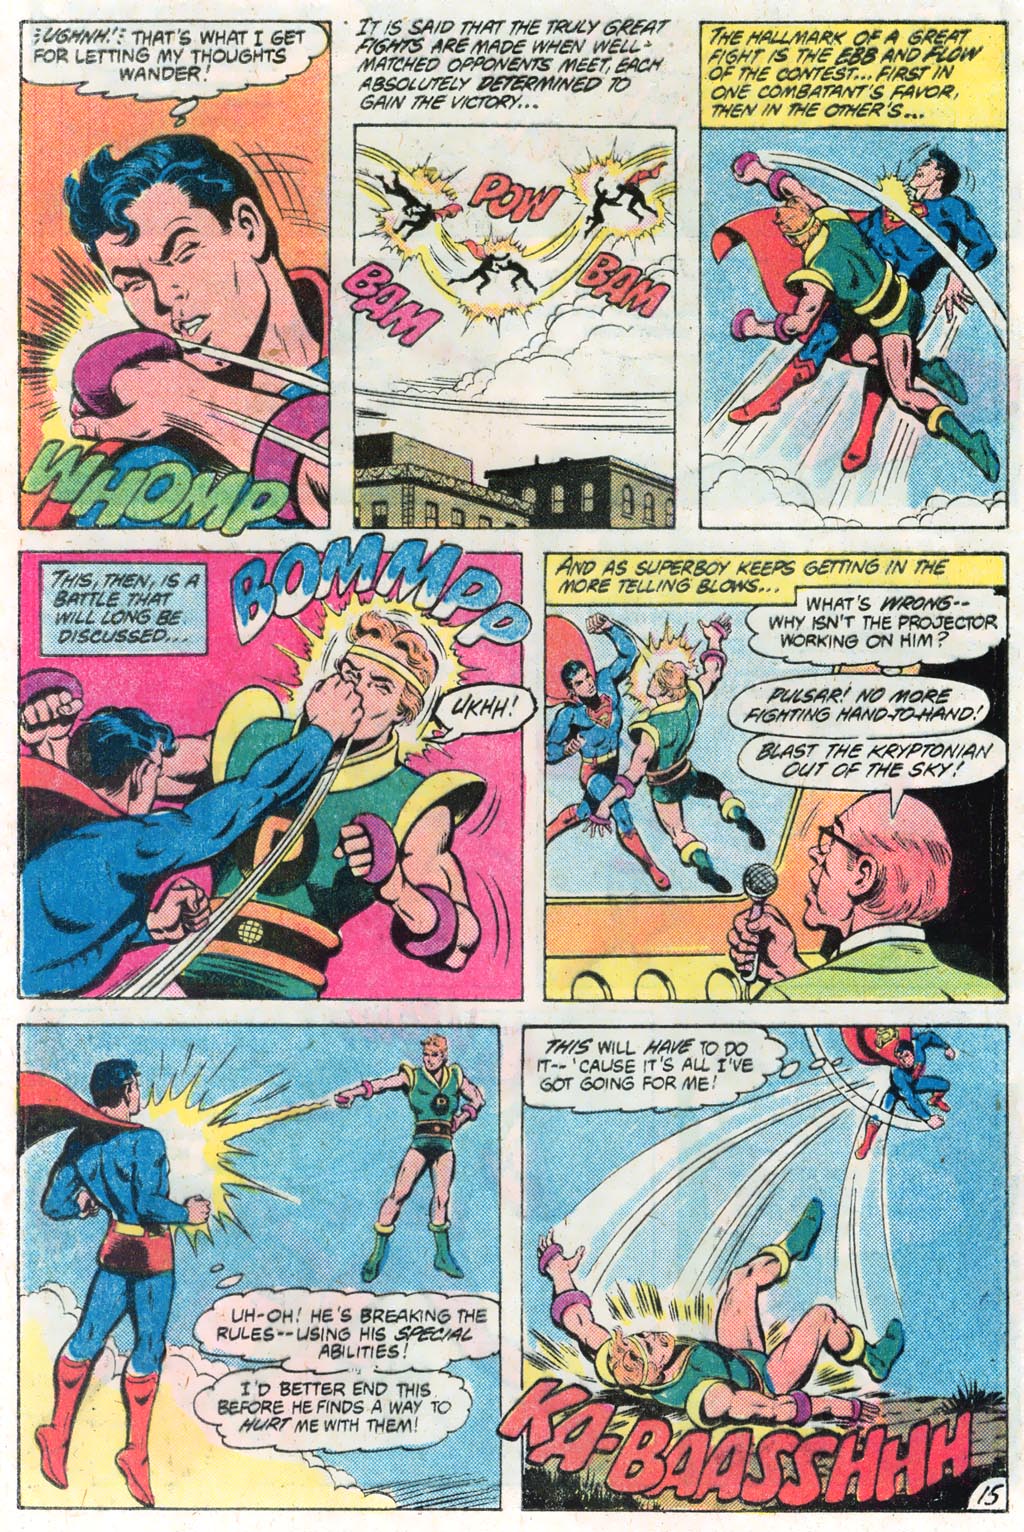 The New Adventures of Superboy 31 Page 19